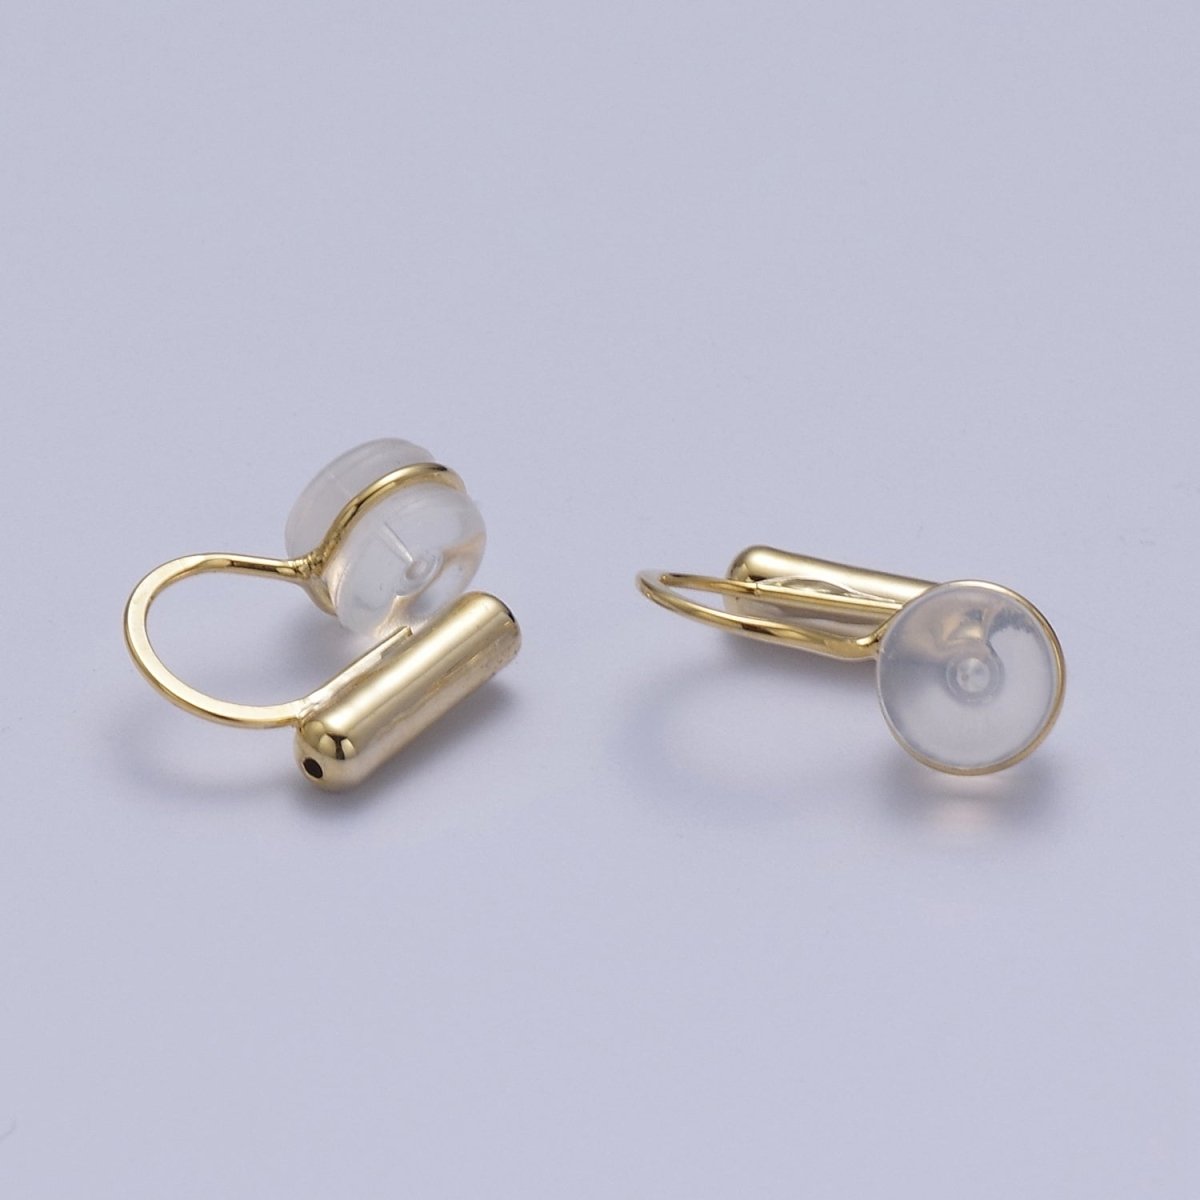 Silicone Earring Backings, Hypoallergenic Clip On Earring Backs For Jewelry Making, K-319 - DLUXCA